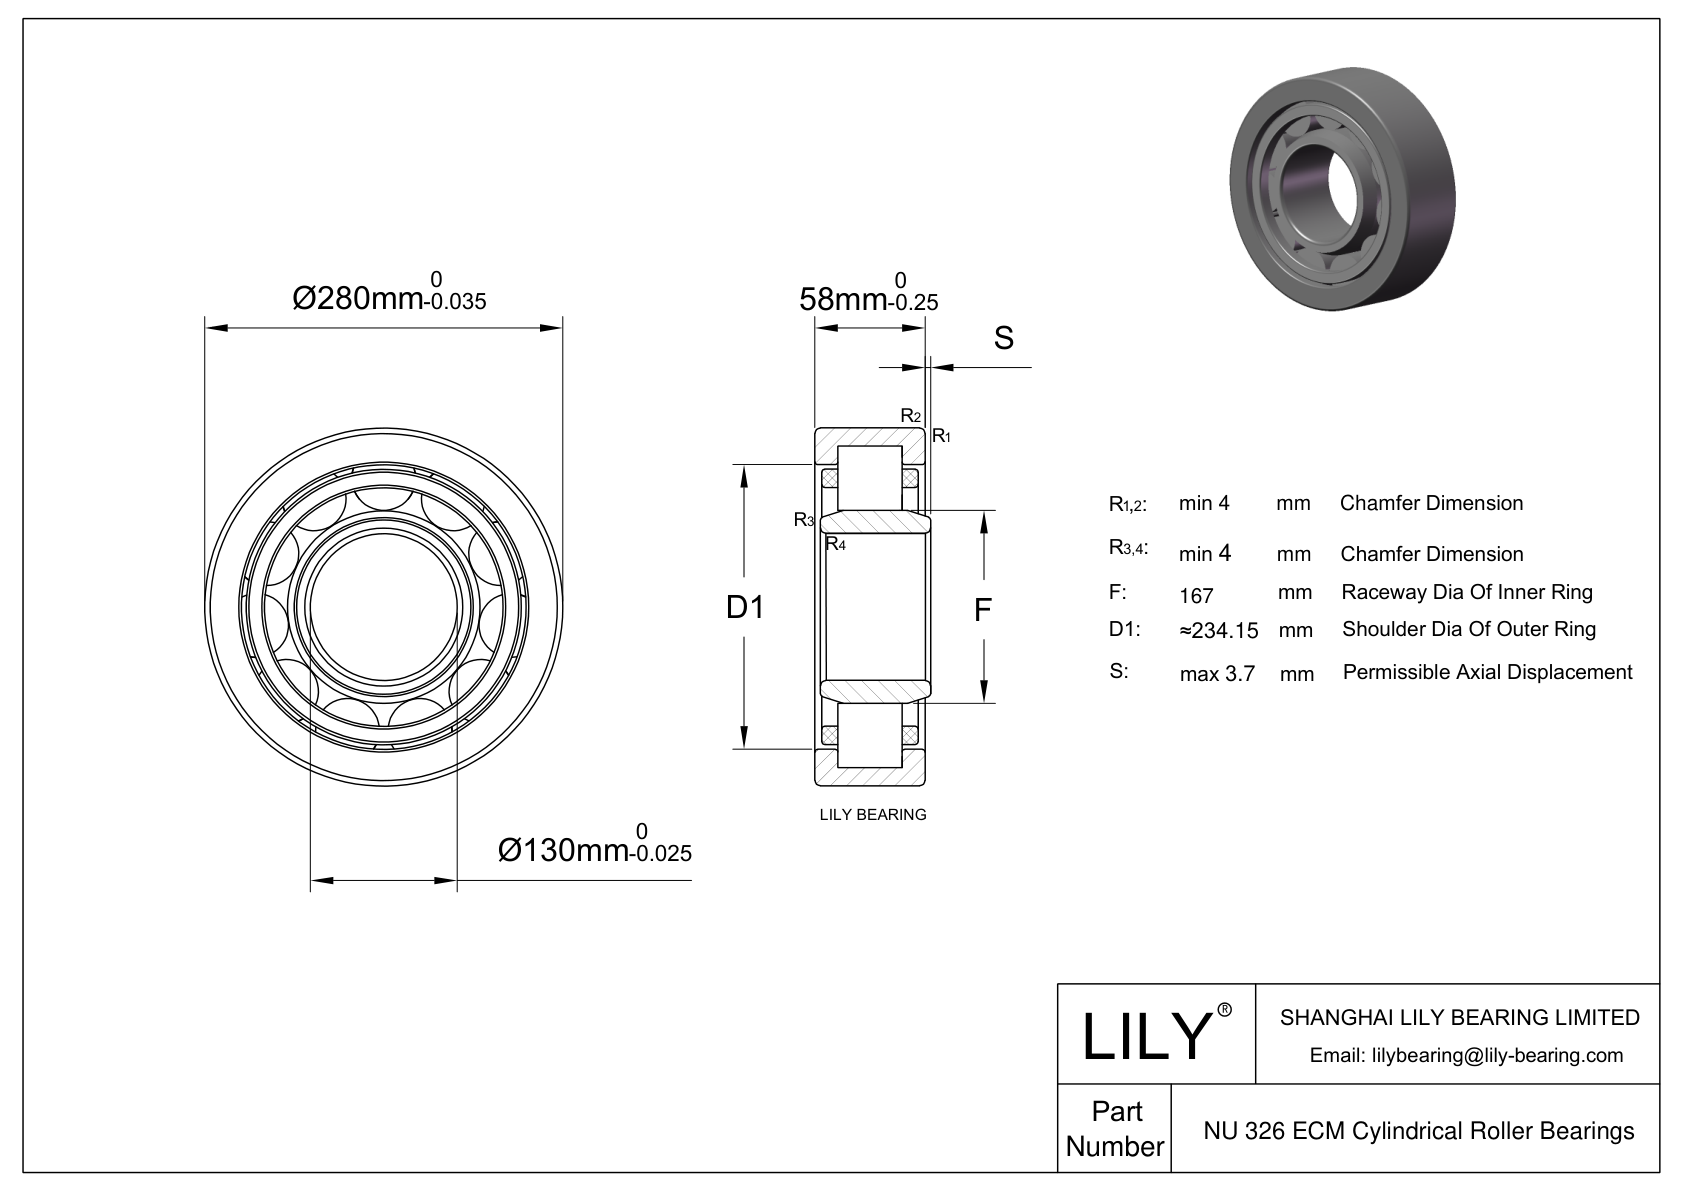 NU 326 ECM/C3VL2071 Ceramic Coated Cylindrical Roller Bearings cad drawing